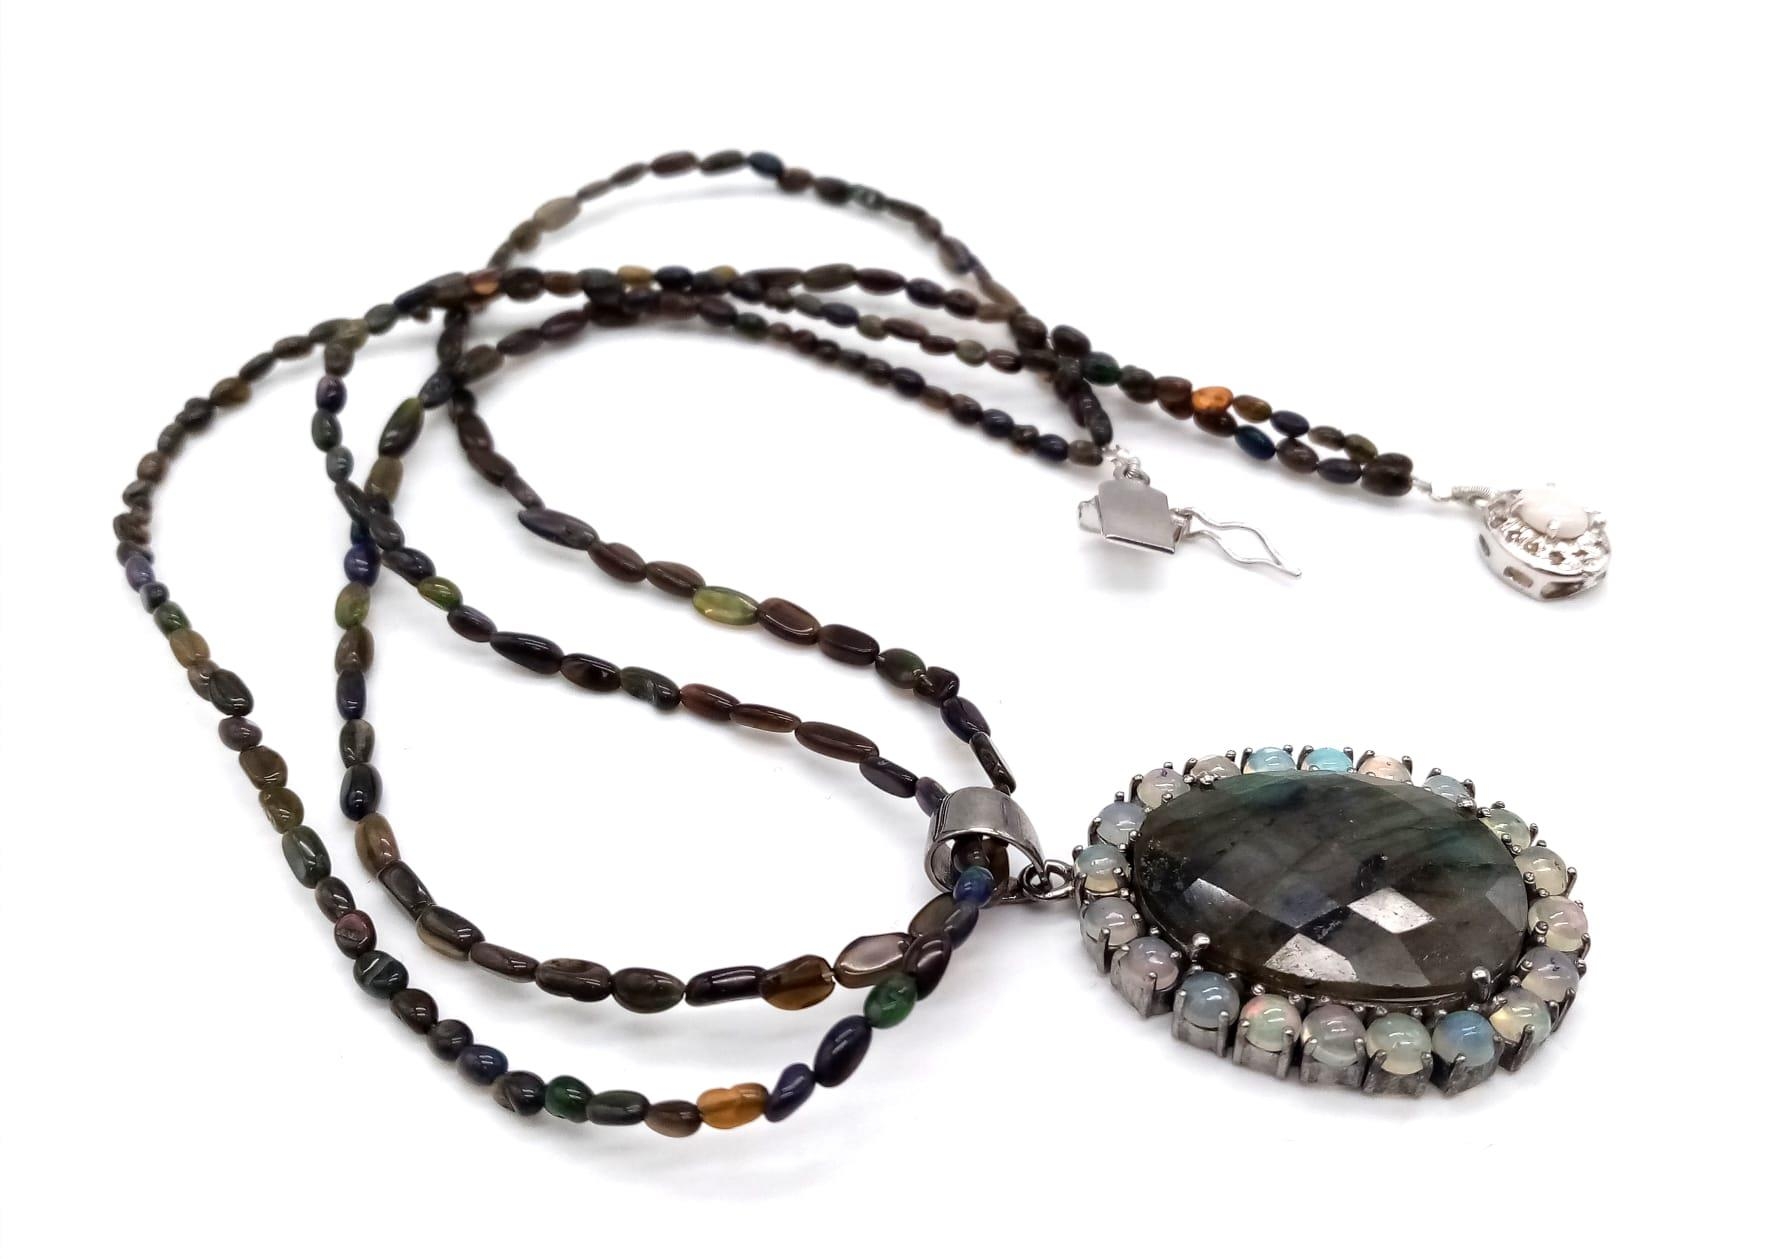 An Ethiopian Black Opal Bead Necklace with a Labradorite 925 Silver Pendant with White Fire Opal - Image 4 of 5